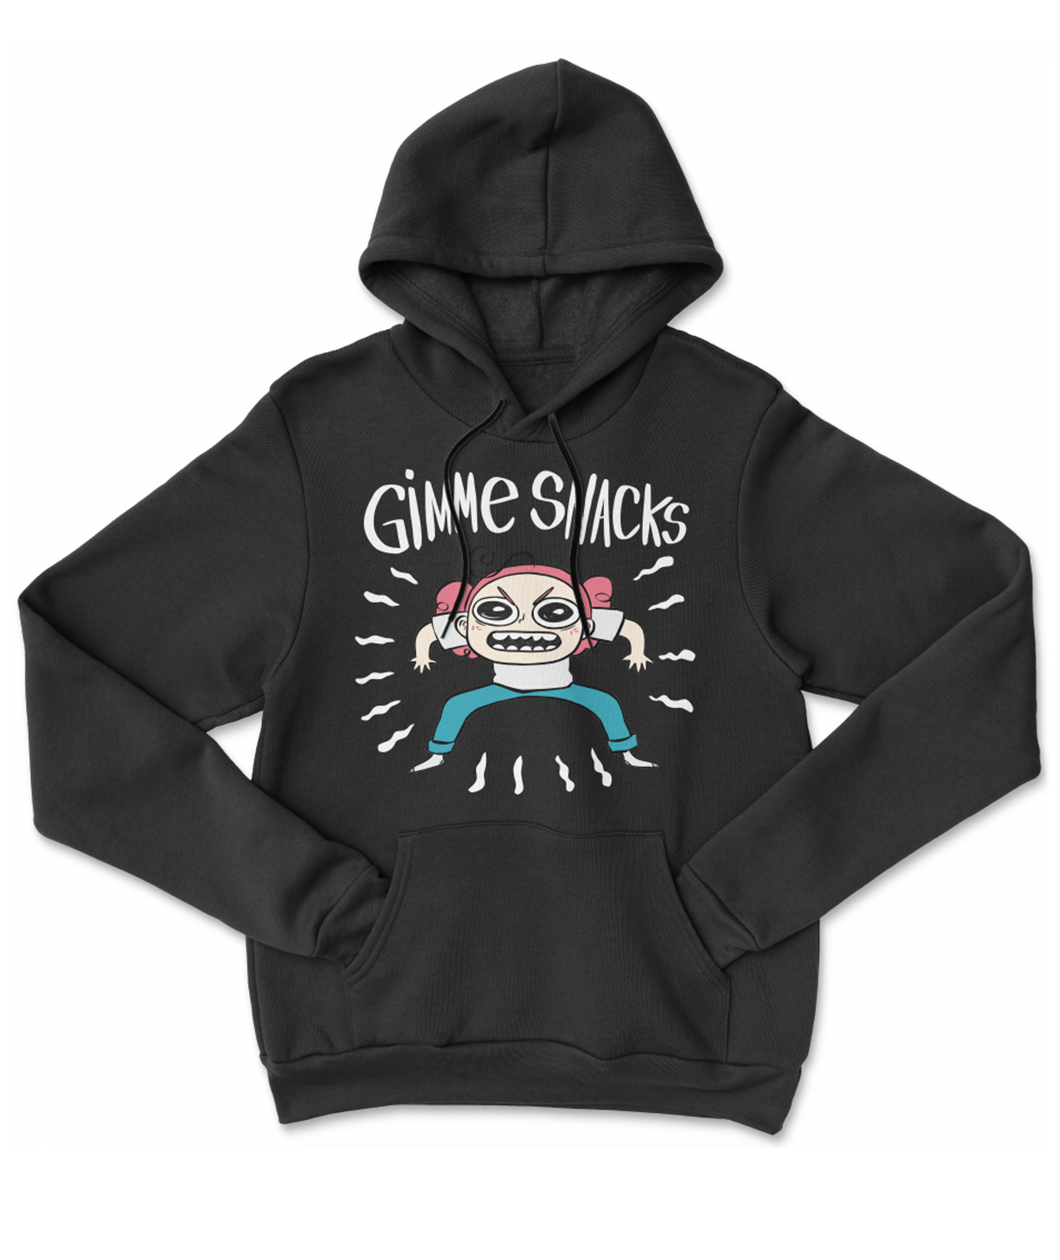 A black hoodie with the What's Up Beanie character looking angry with the text "Gimme Snacks". 